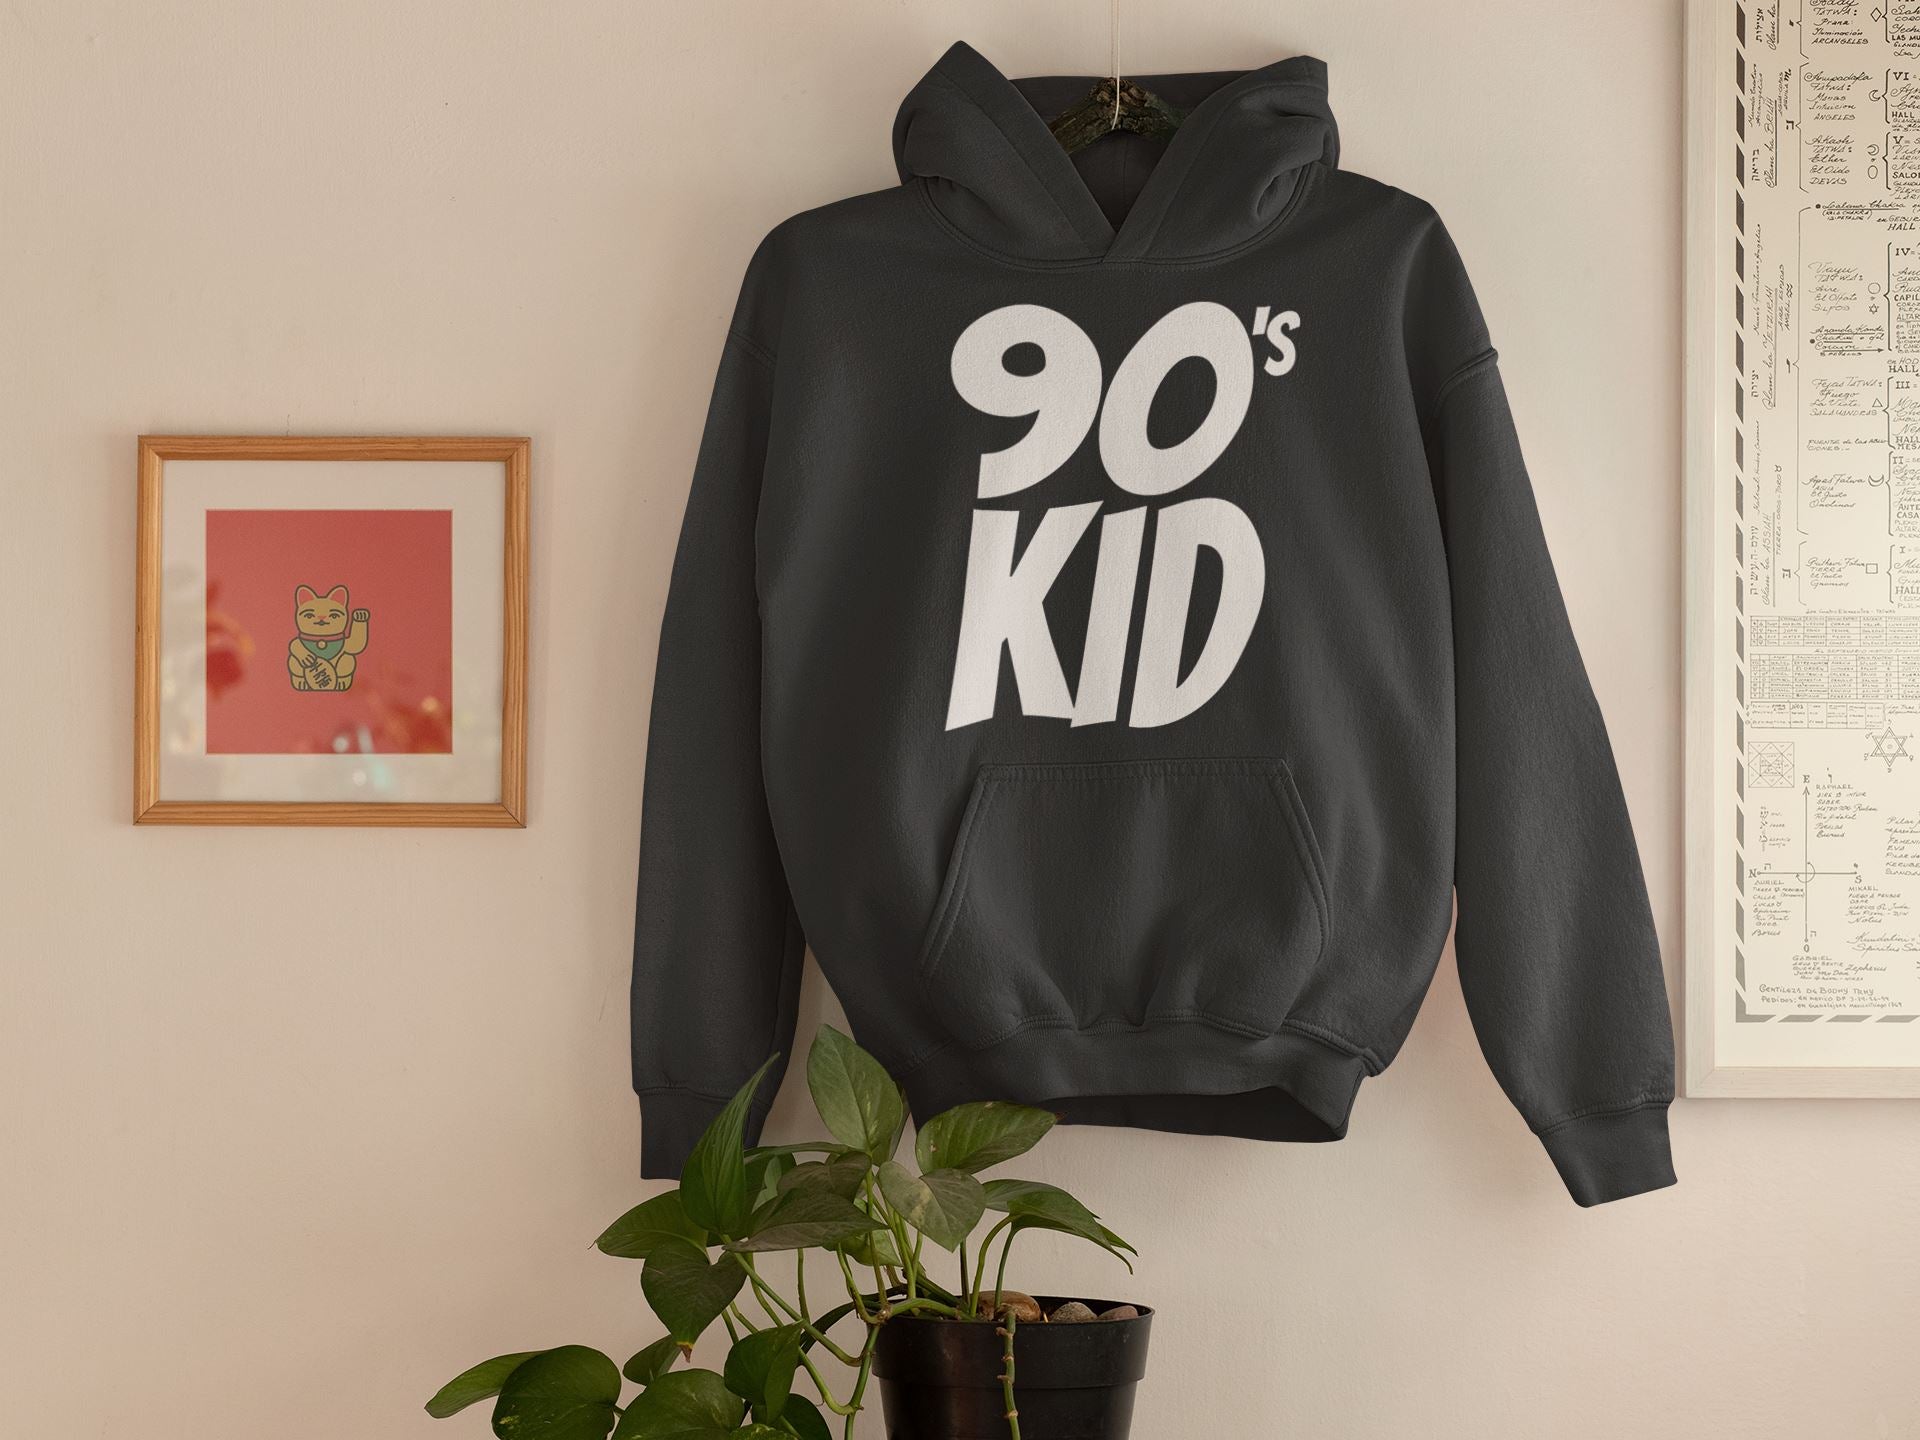 90's Kid Special White Hoodie for Men and Women freeshipping - Catch My Drift India